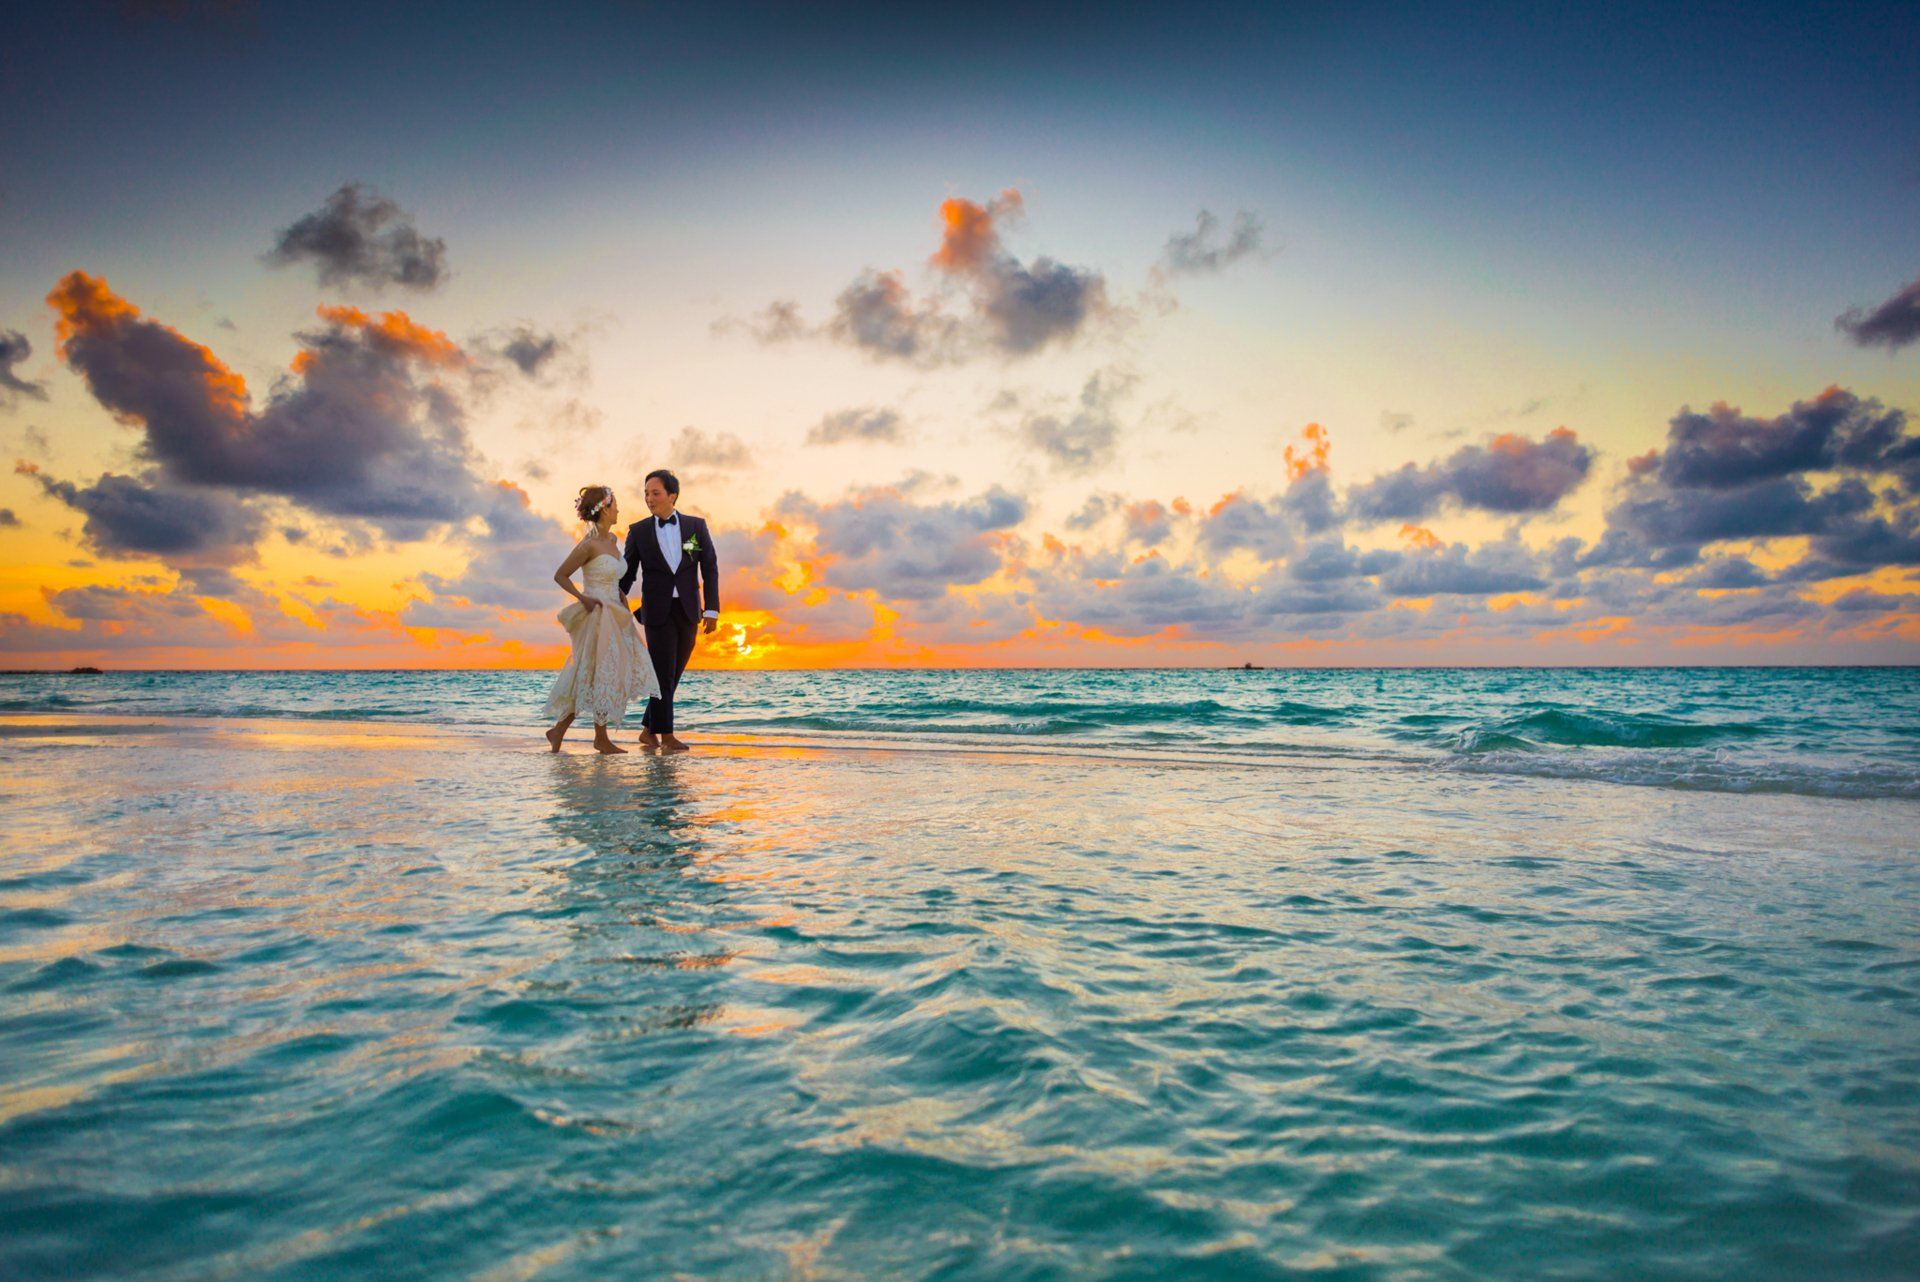 A bride and groom are walking on the beach at sunset.